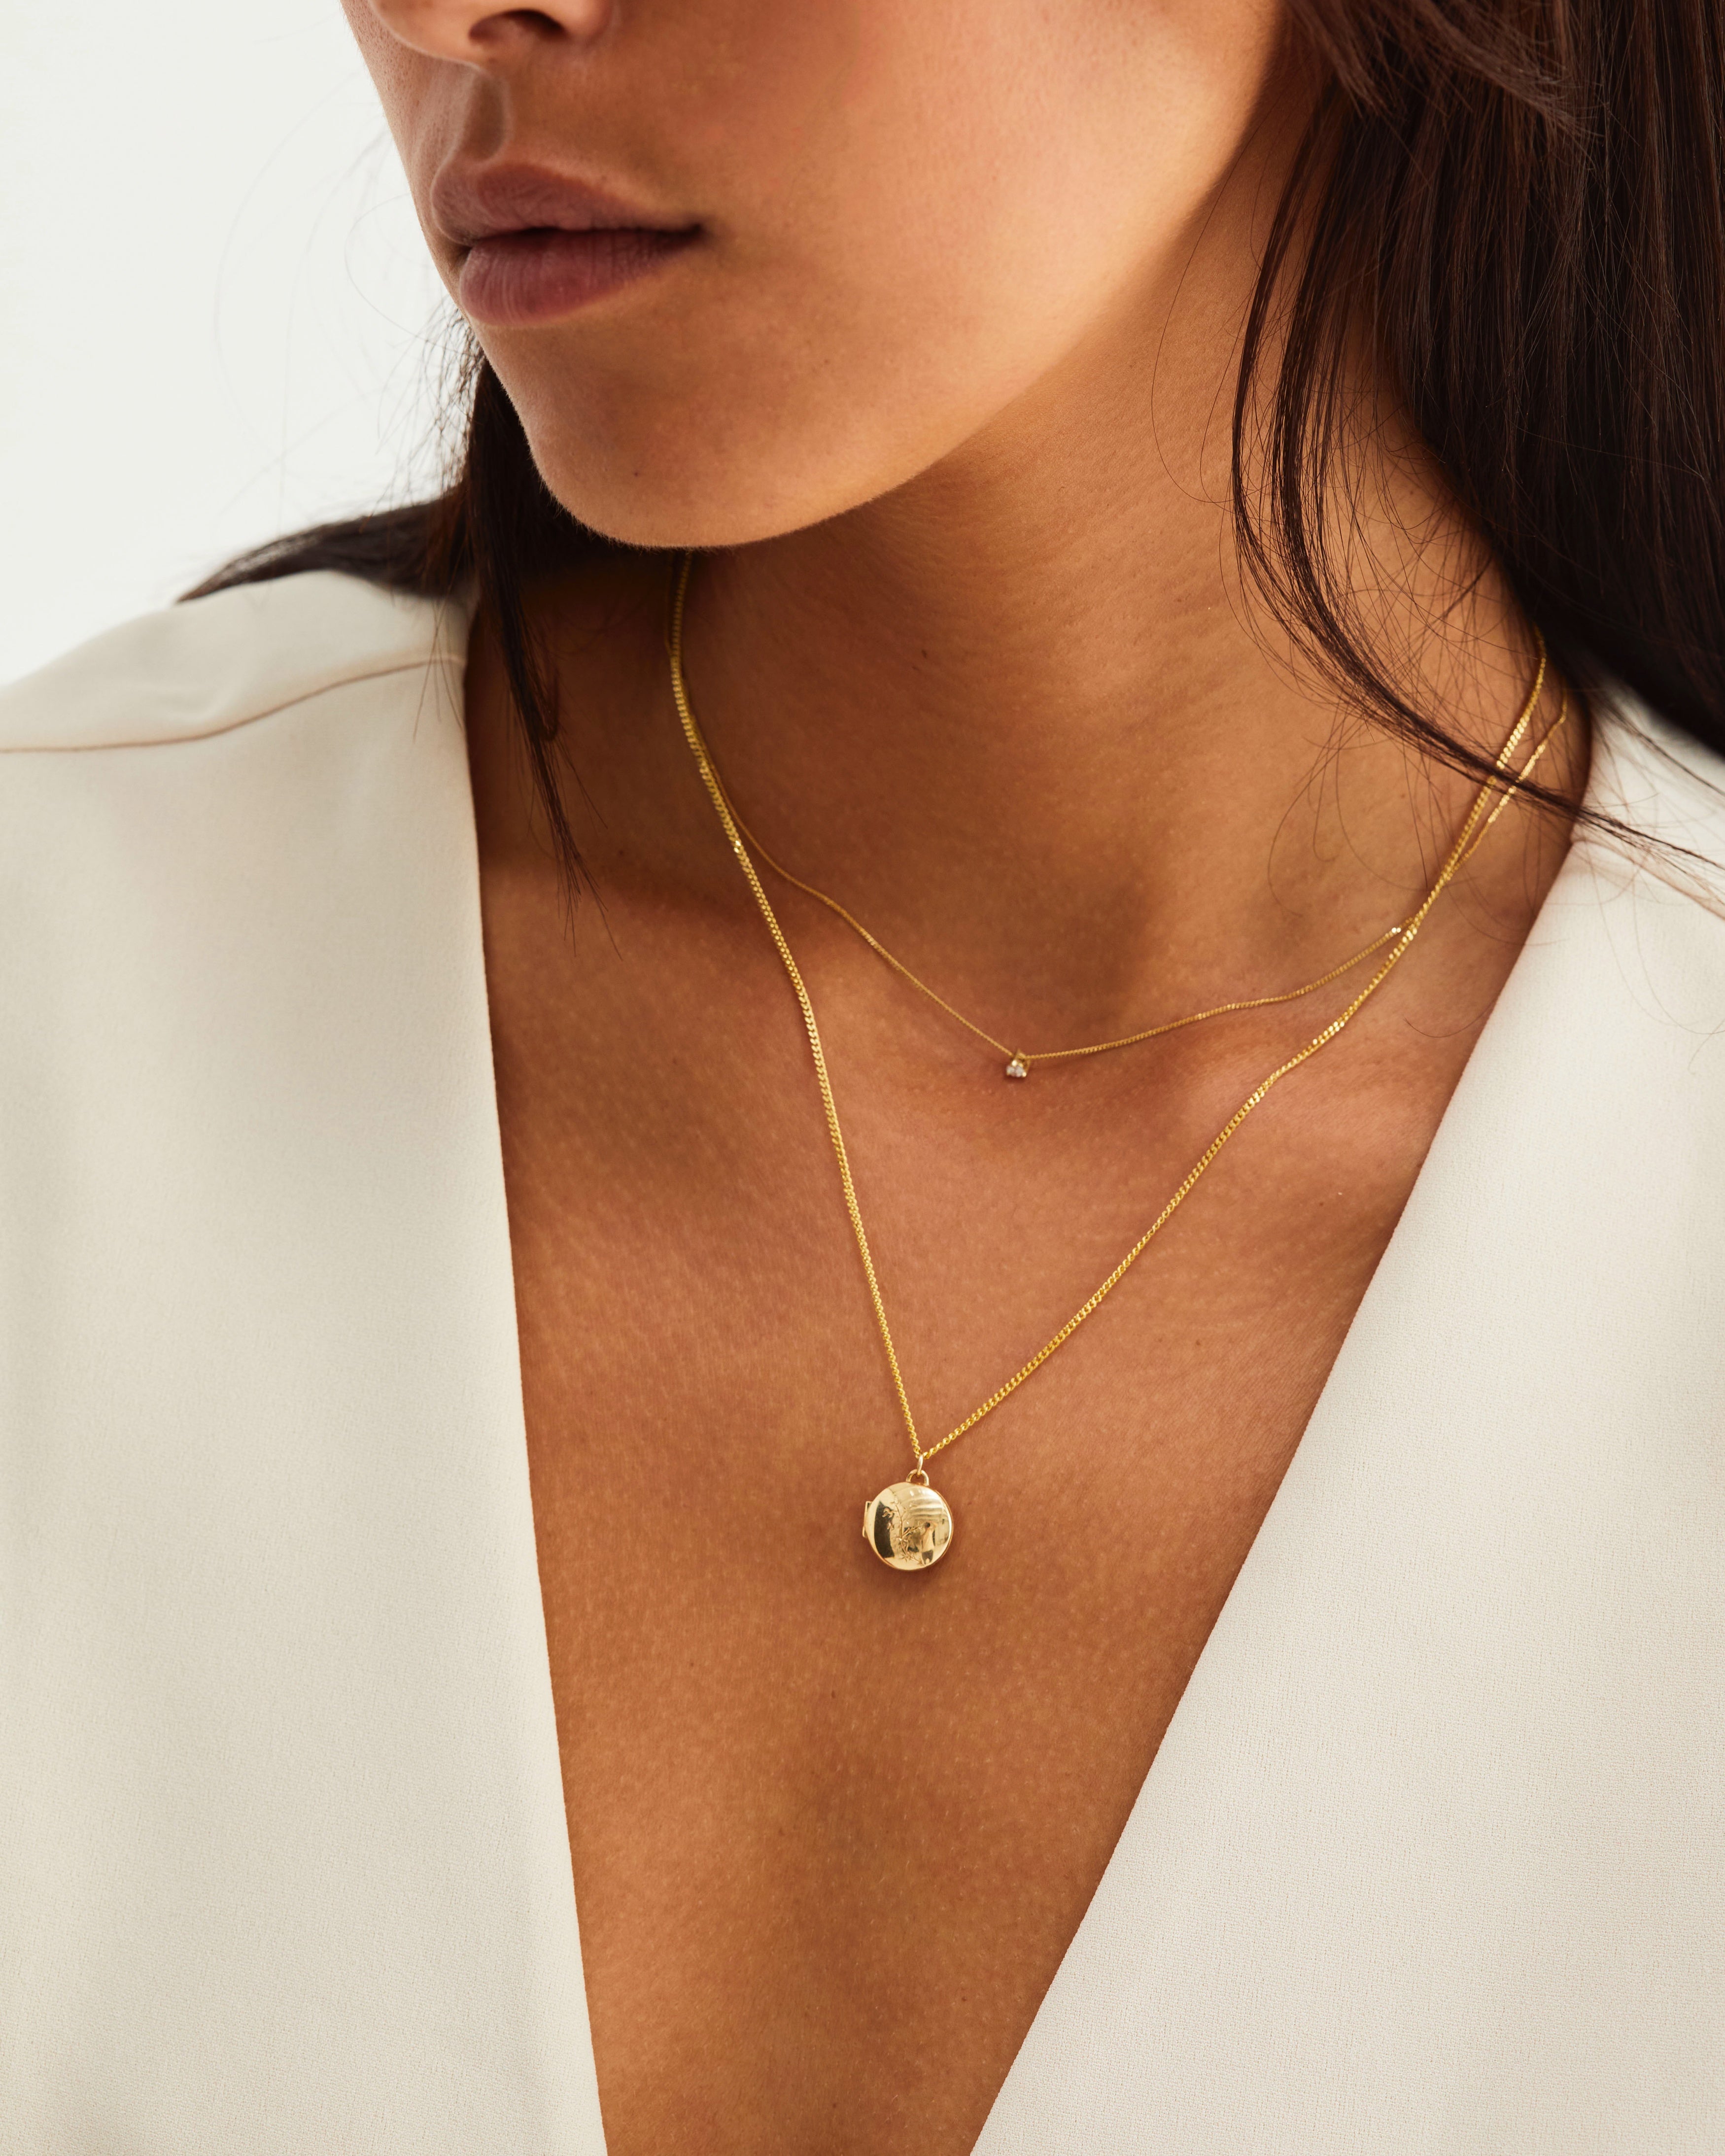 Model wears a gold locket layered with small diamond pendant